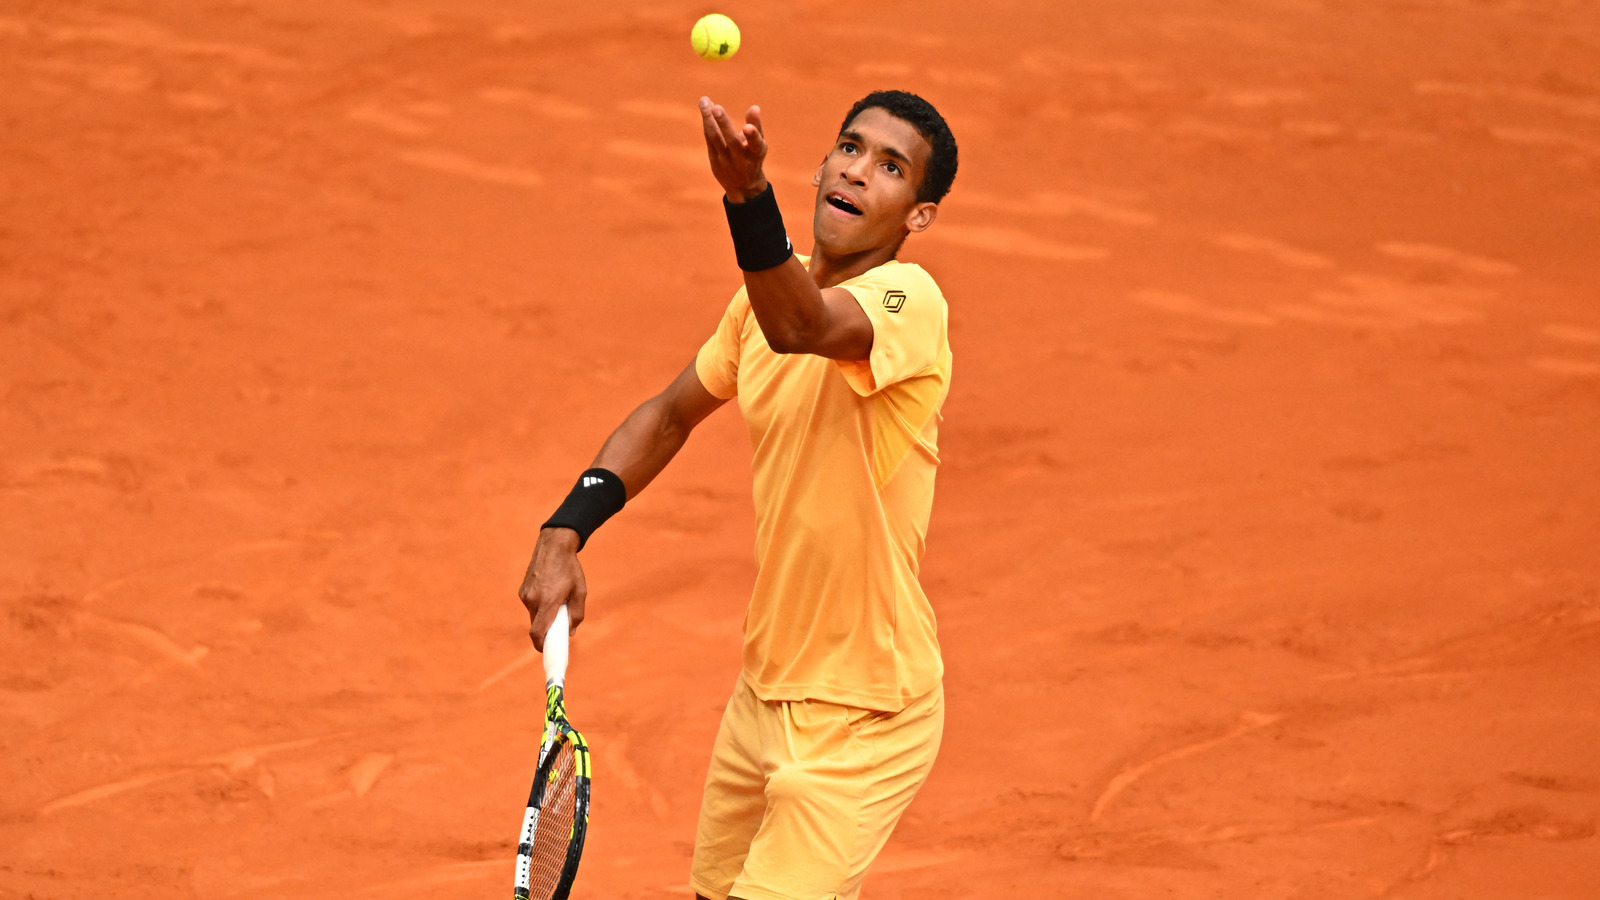 'I don’t know if it’s ever happened,' Felix Auger-Aliassime gets his 3rd walkover in Madrid as unfortunate Jiri Lehecka is forced to retire